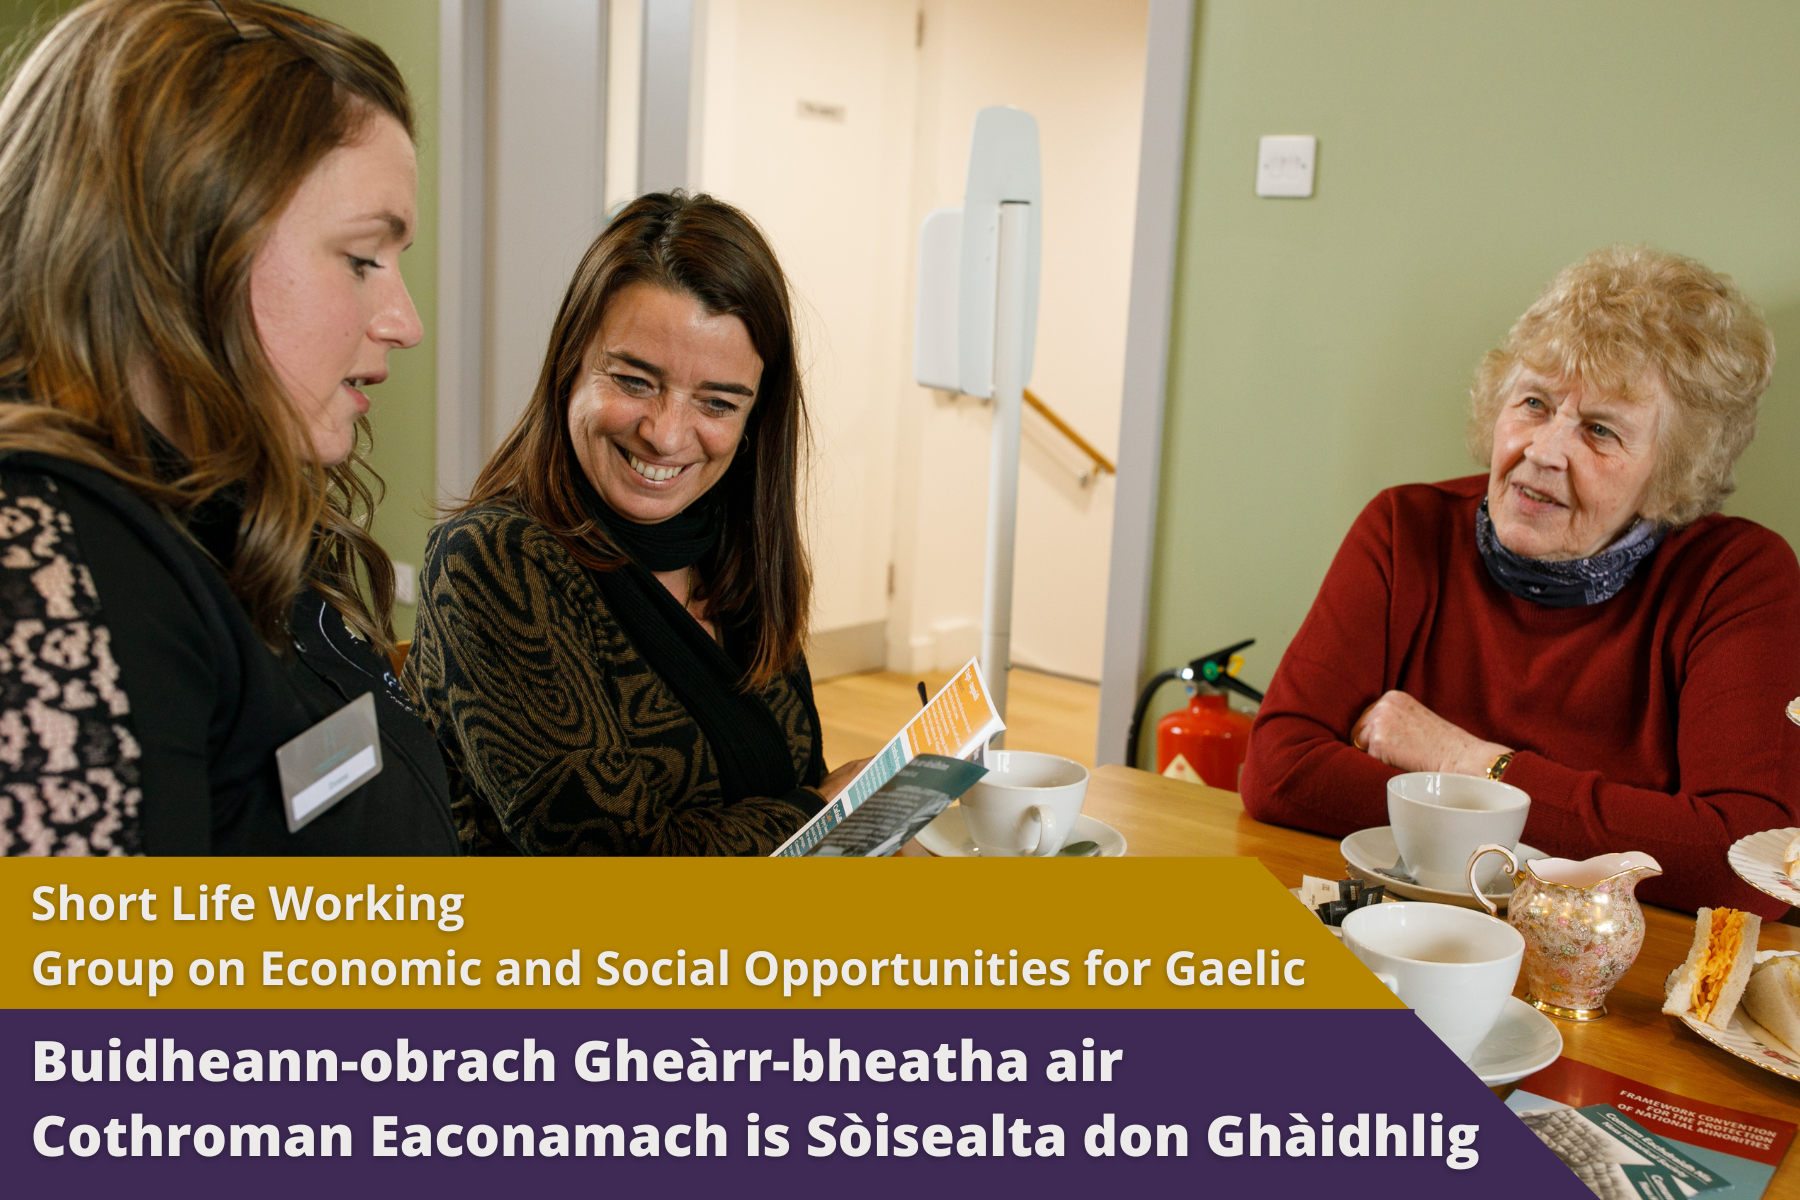 Short Life Working Group on Economic and Social Opportunities for Gaelic: Report to the Cabinet Secretary for Finance and the Economy